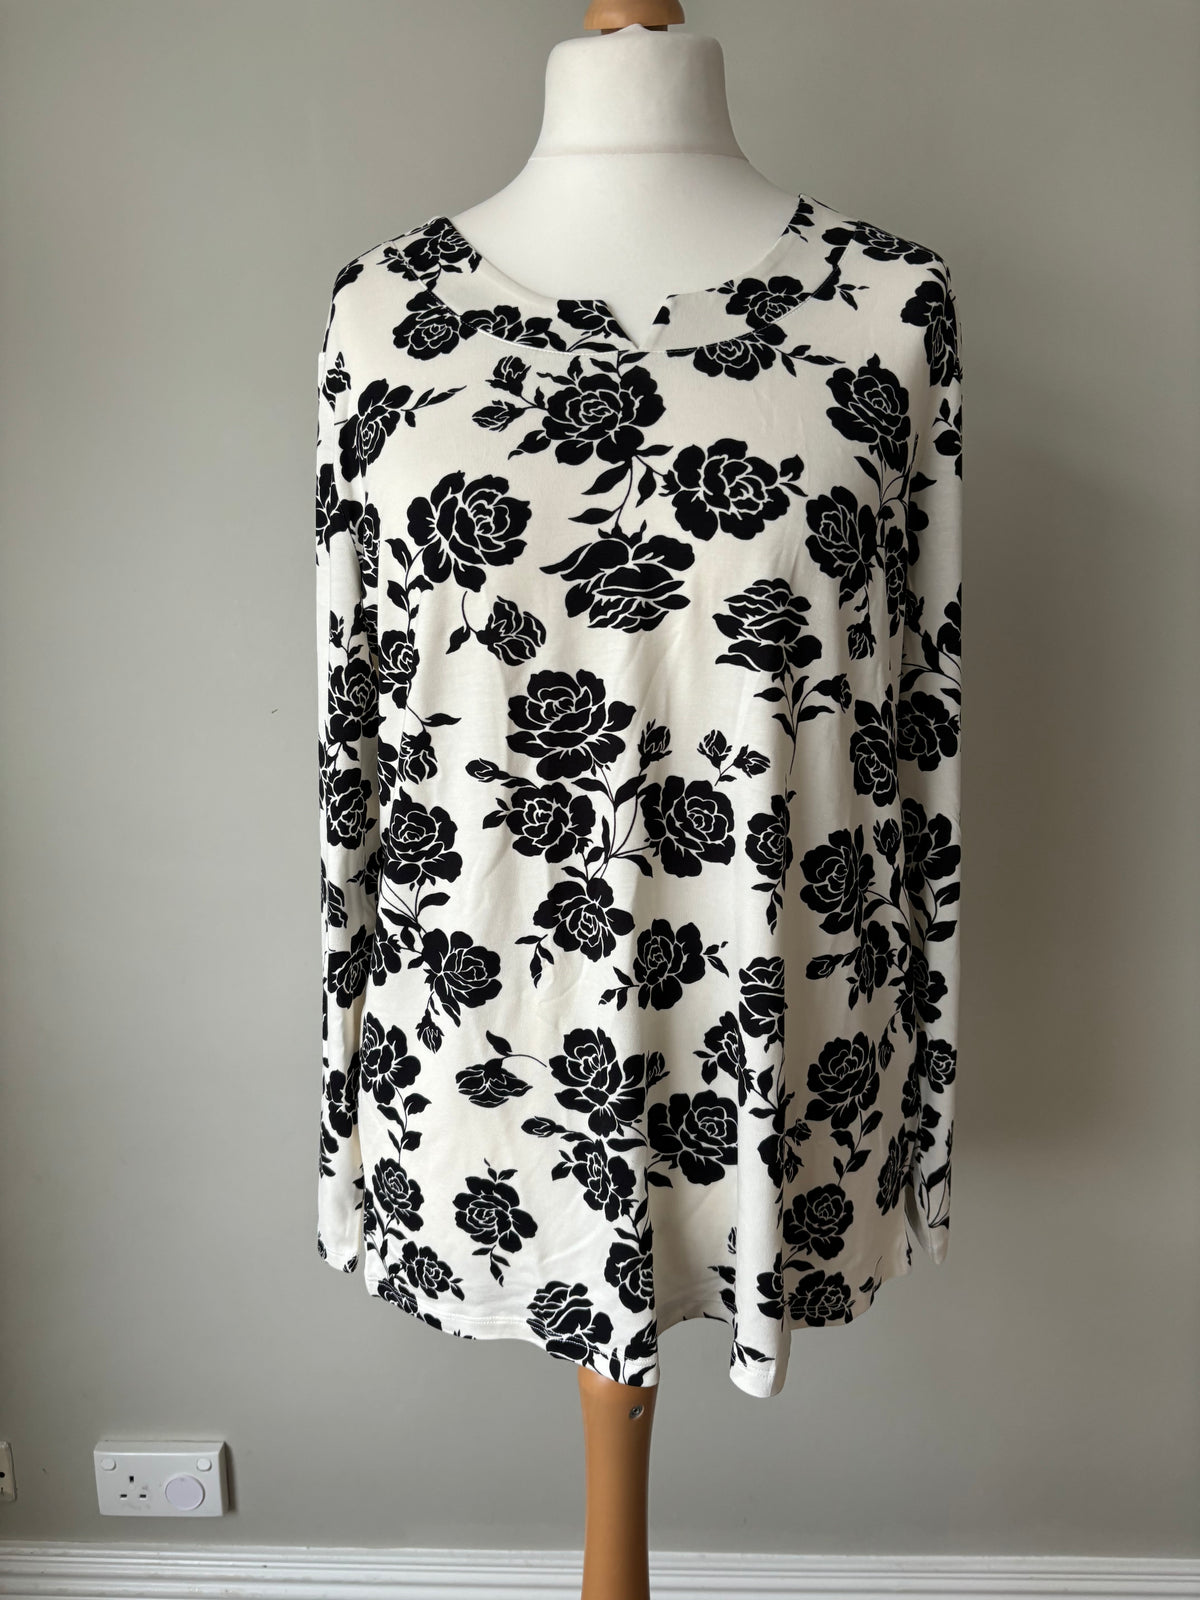 Floral Print Long Sleeve Top by Creation L Size 20